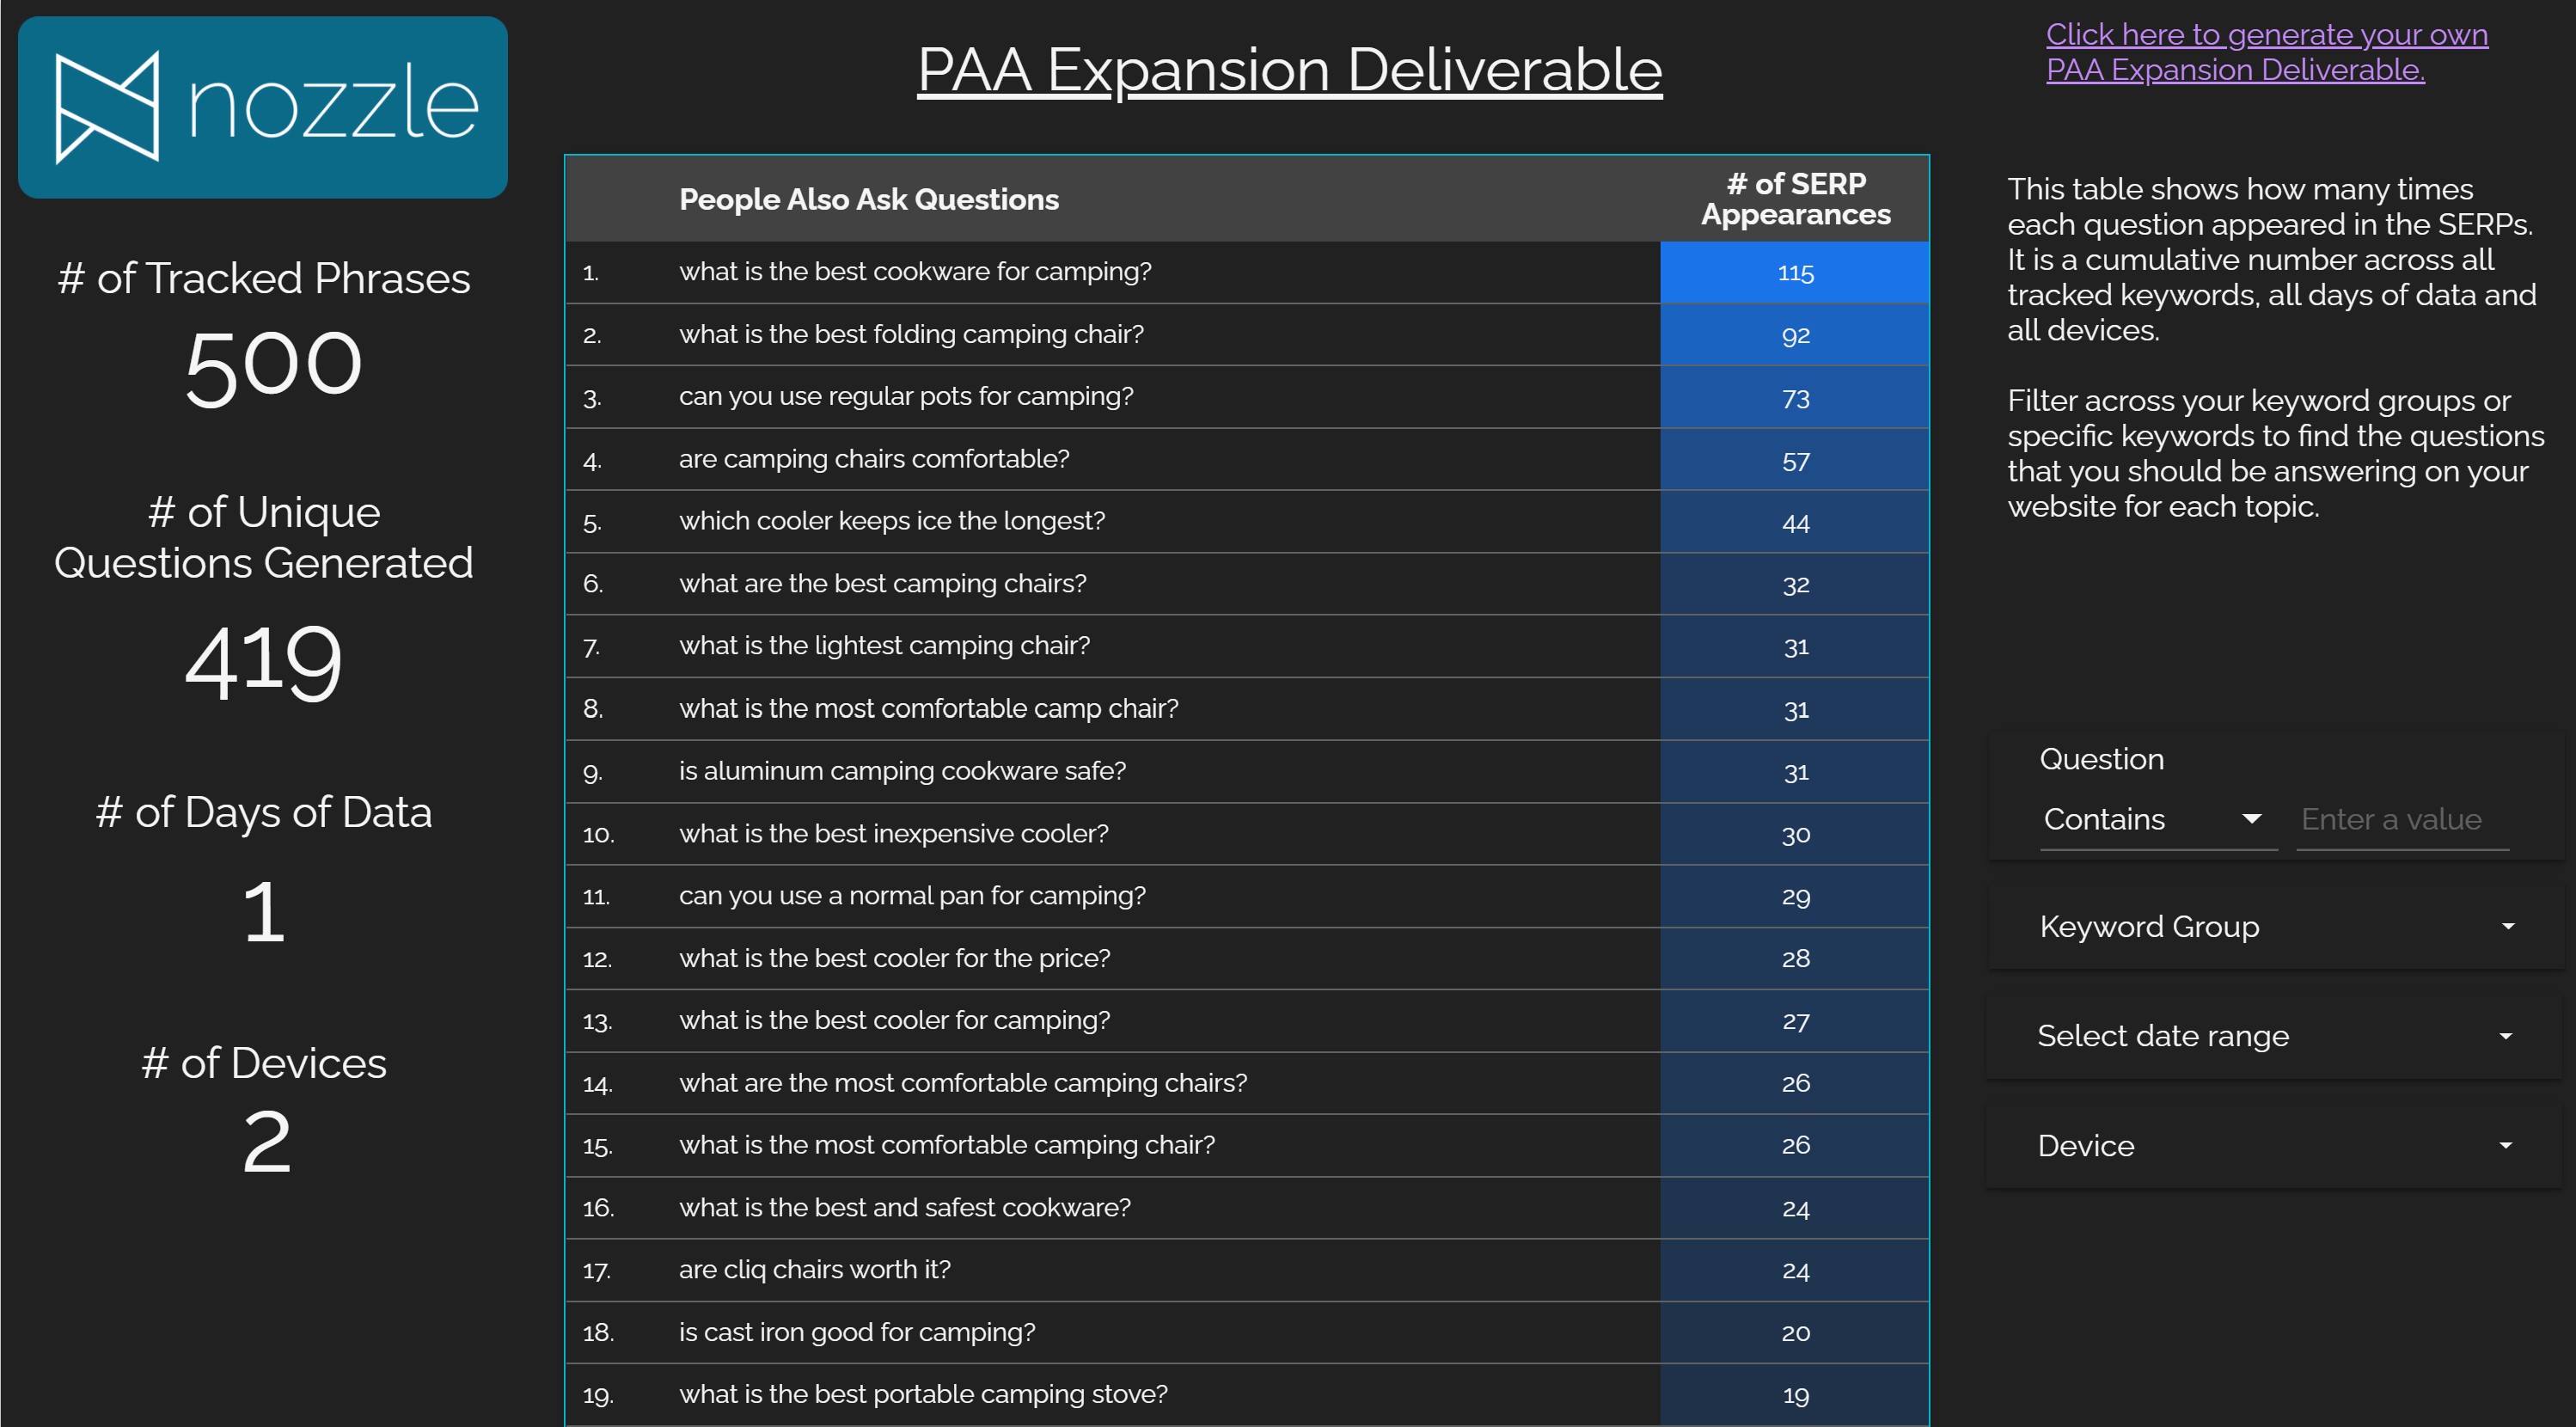 PAA Expansion Deliverable